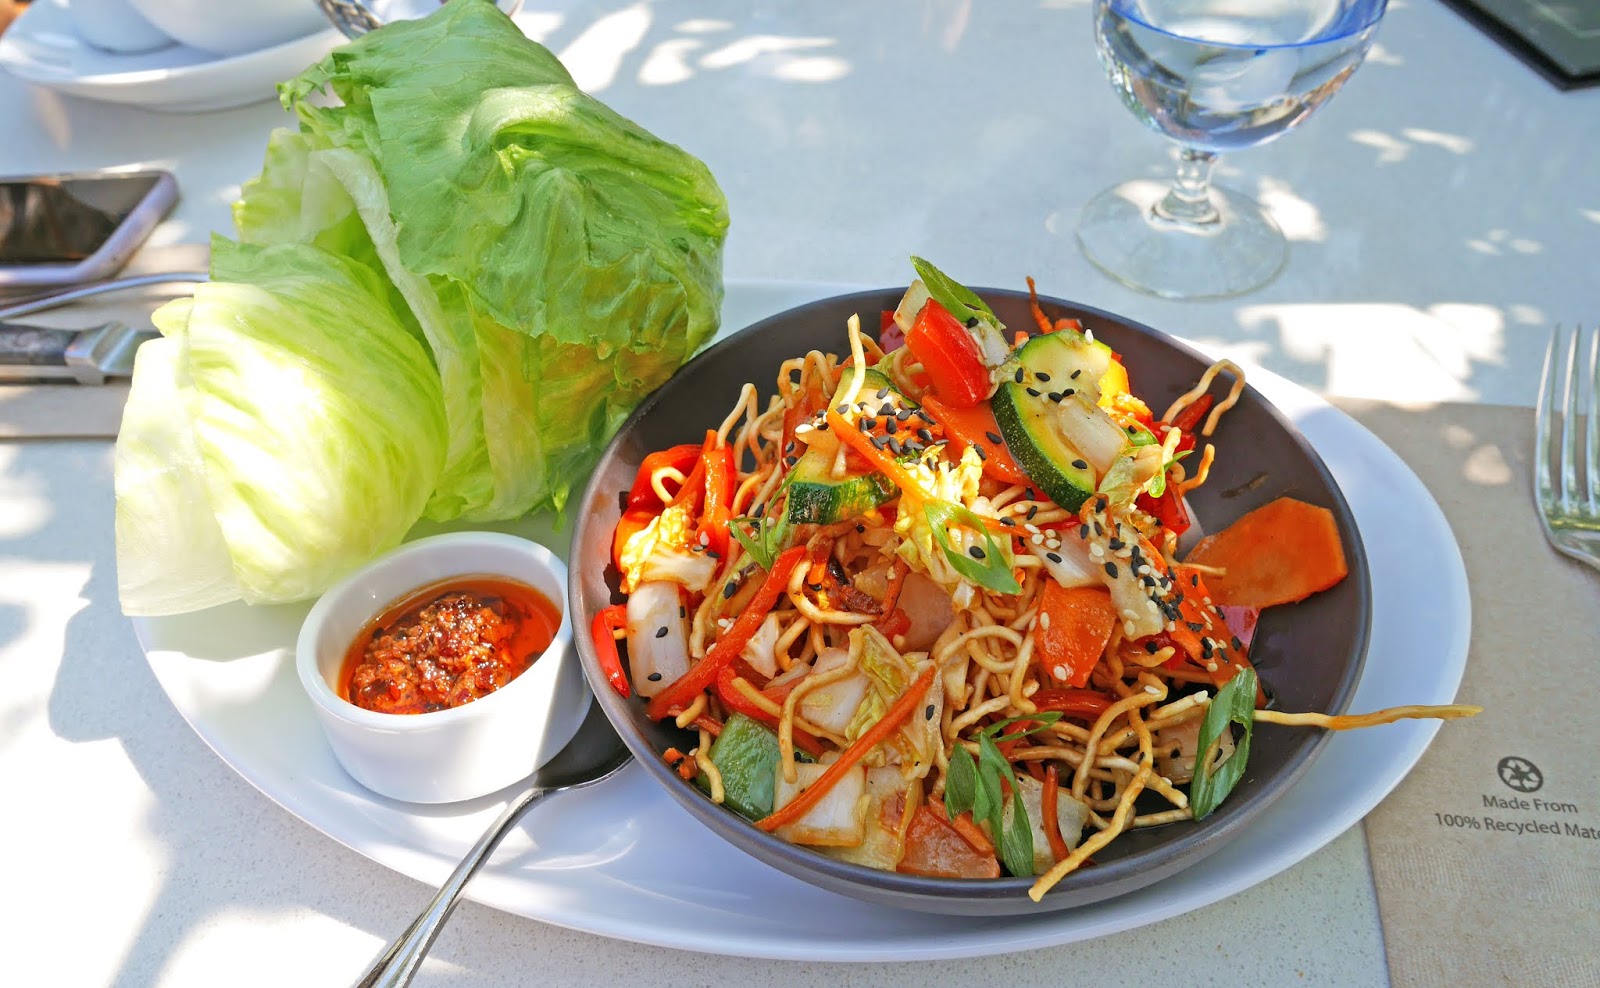 Thai lettuce wraps for lunch at the Joey Barlow restaurant in Calgary, Alberta